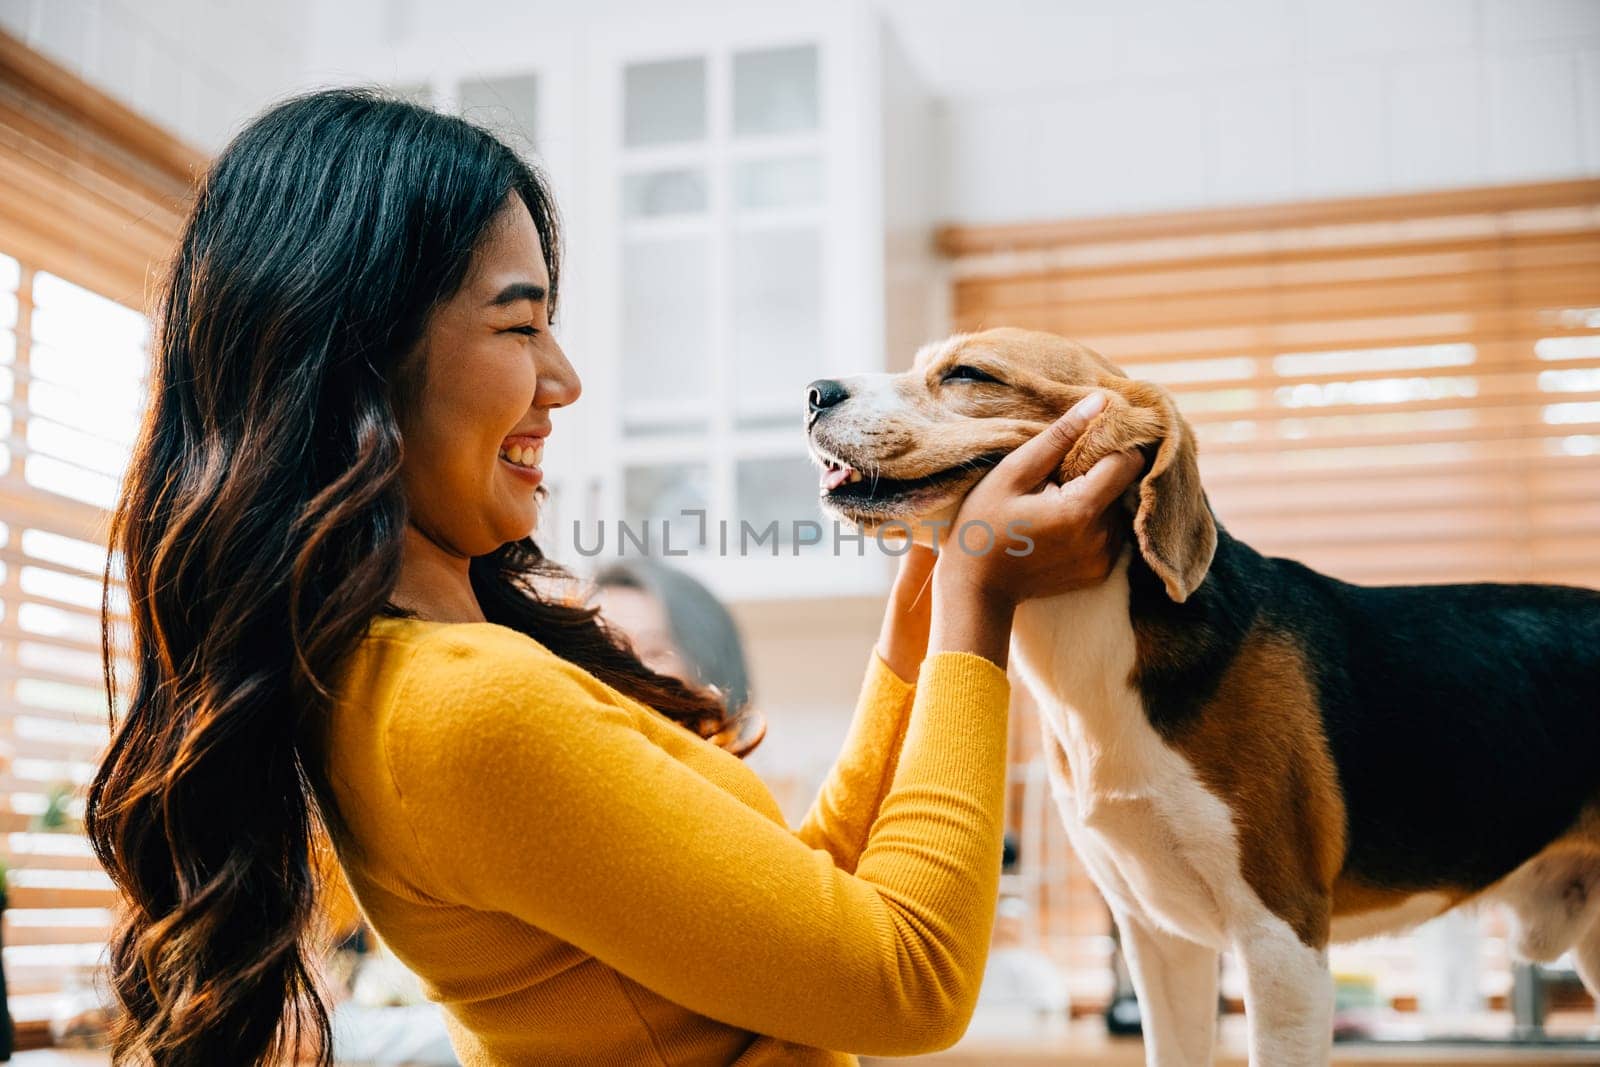 With her Beagle, an Asian woman embraces the kitchen as a place of happiness and play. Their joyful interaction exemplifies the care, togetherness, and family enjoyment of having a pet. Pet love